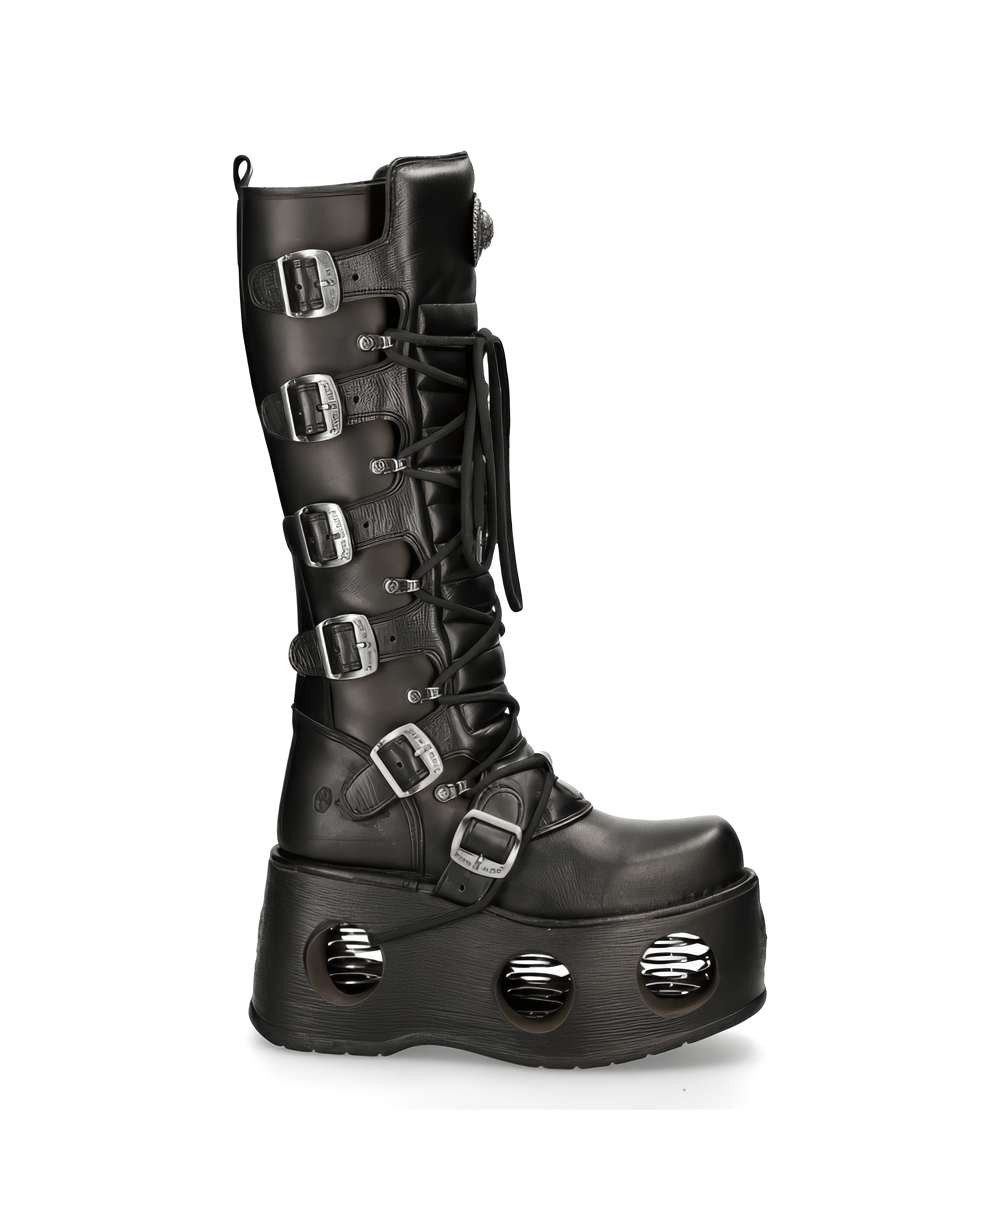 NEW ROCK Gothic Style High Platform Boots with Buckles